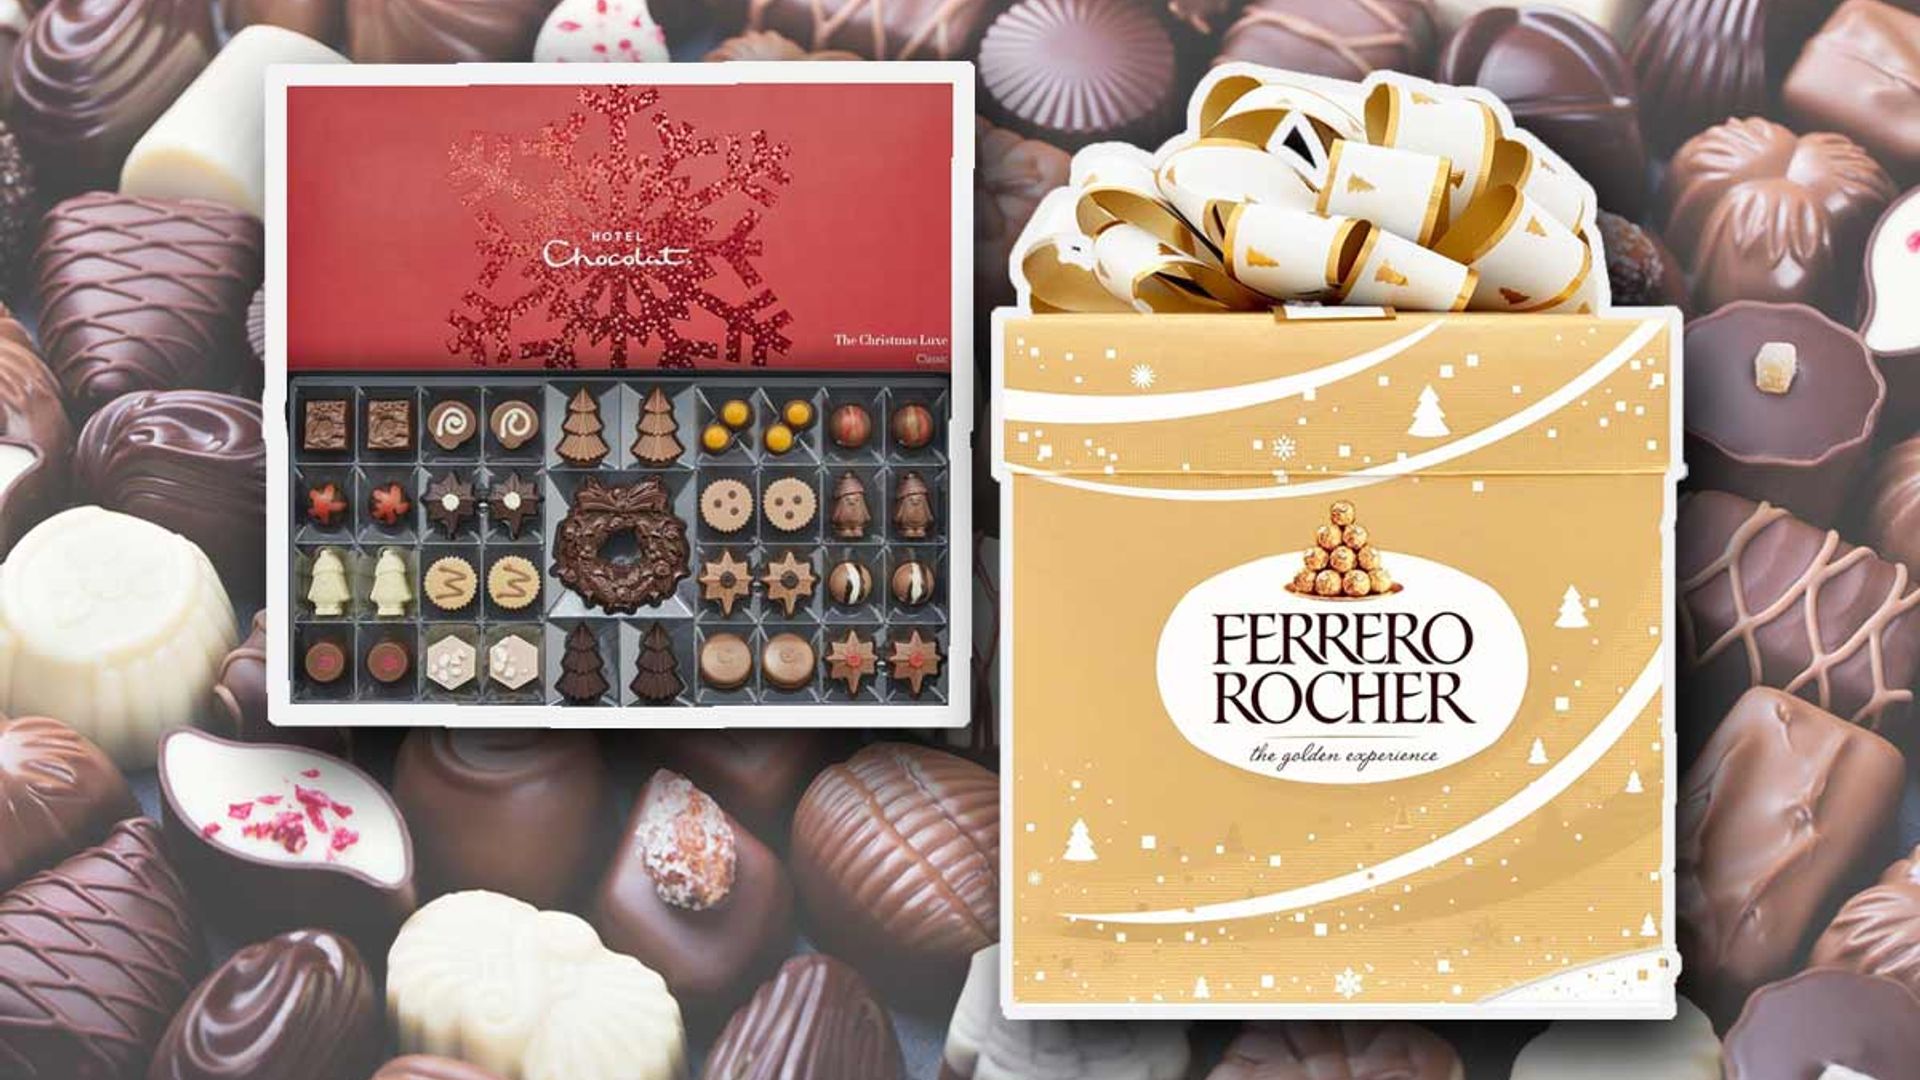 30 best chocolate gifts you can buy online now for a Christmas sweet treat